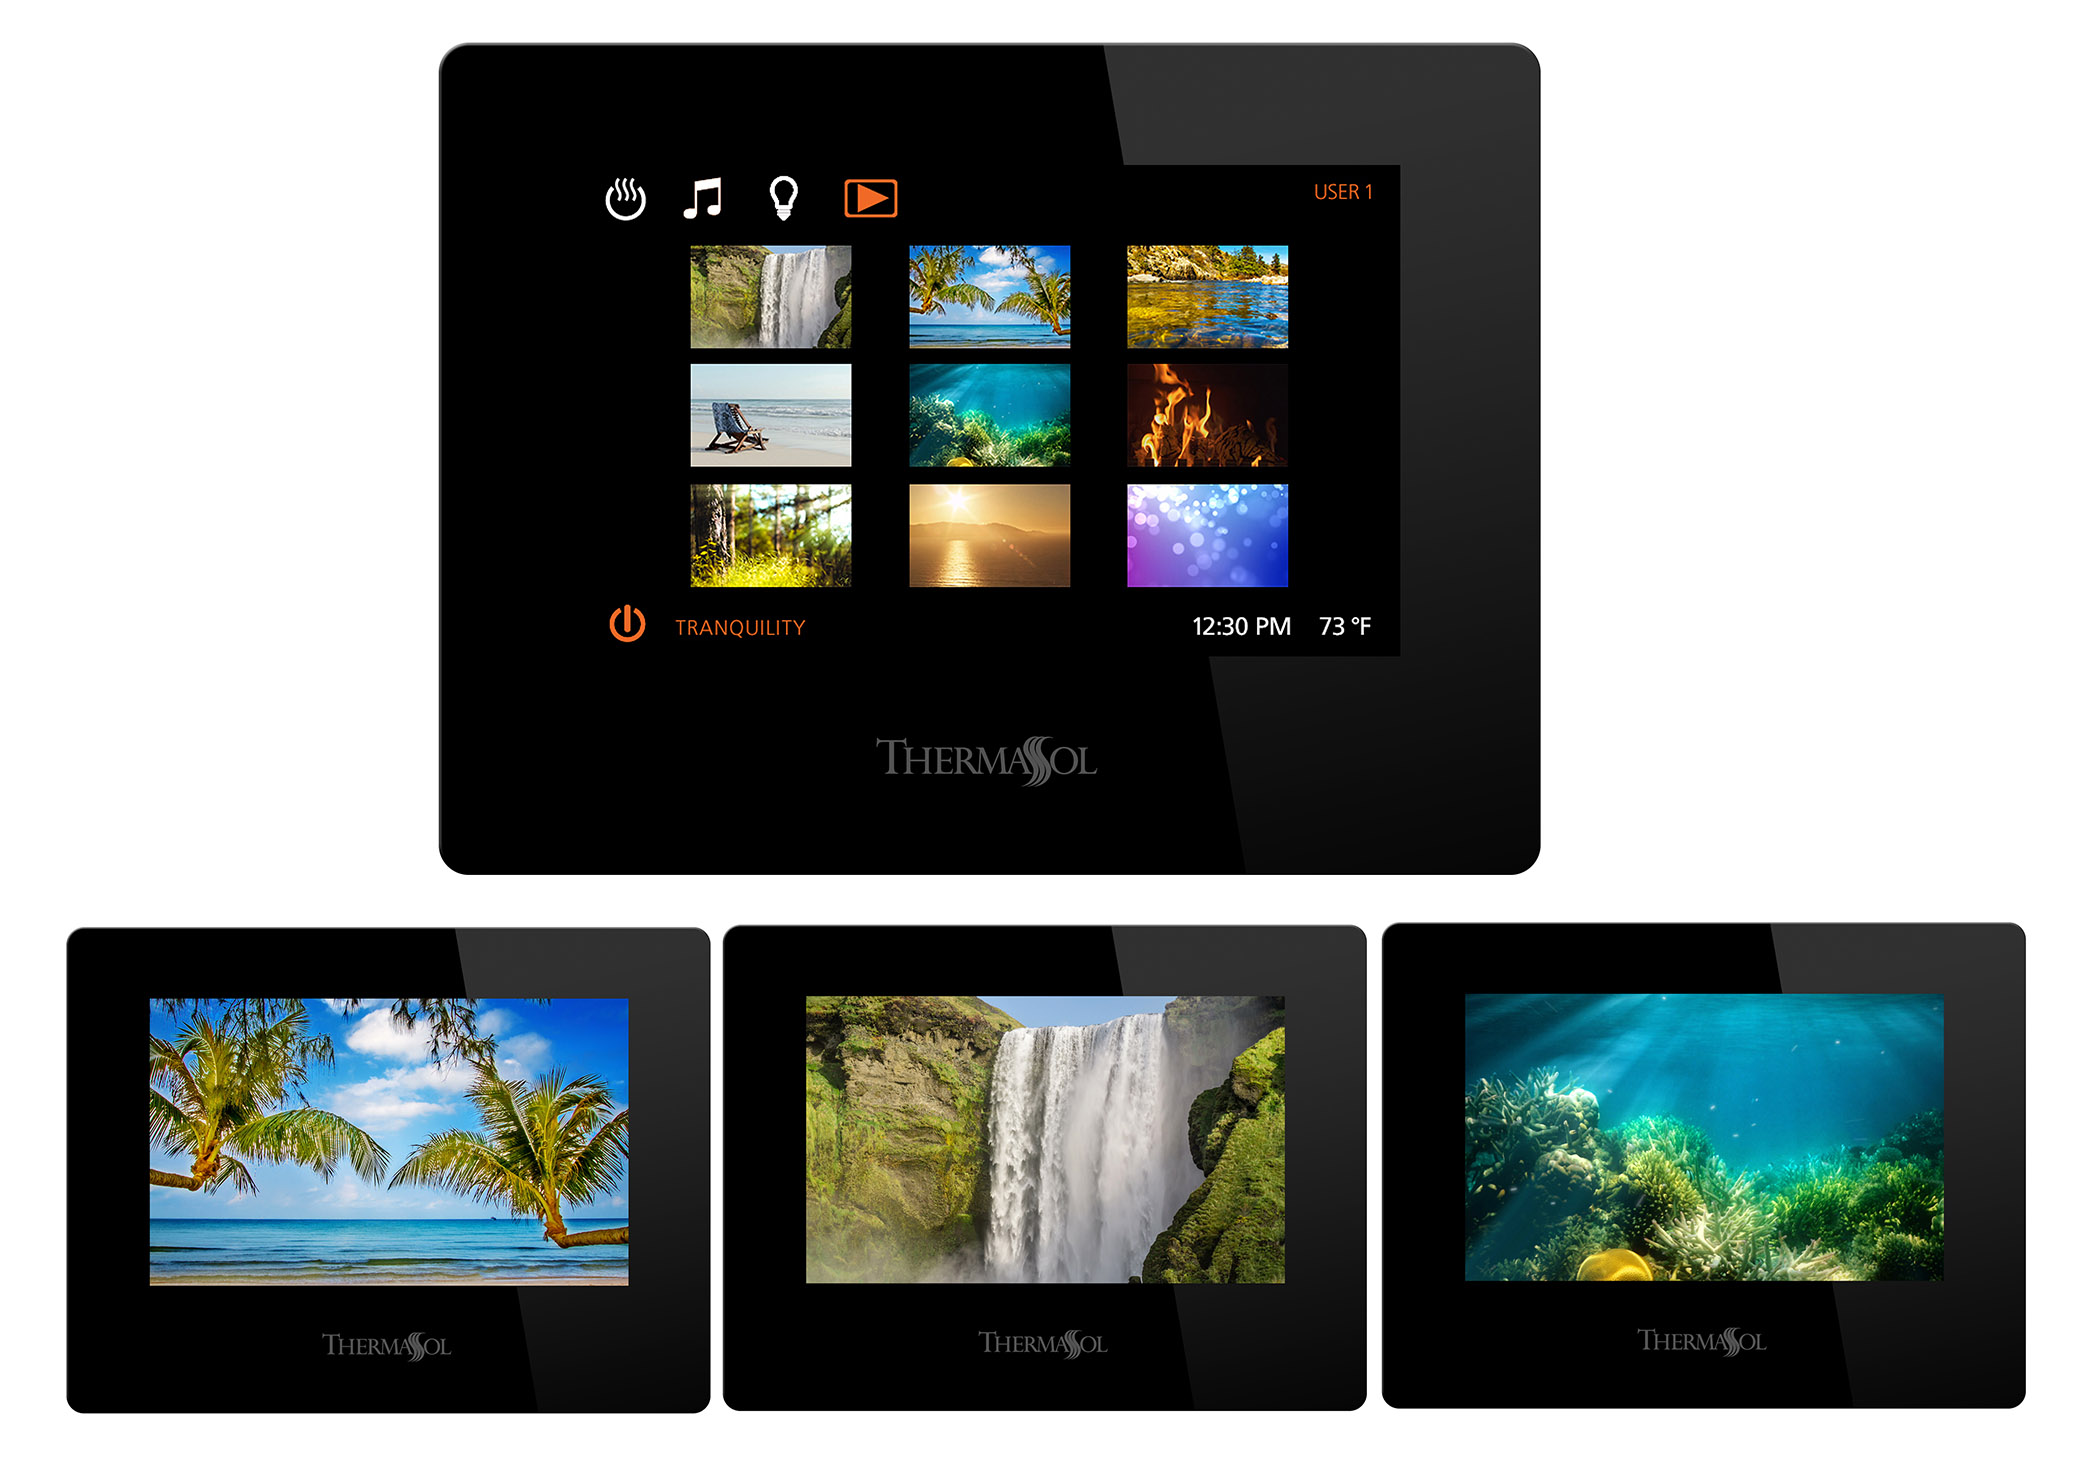 ThermaSol’s Tranquility scenes mode offers users nine soothing videos which enhance the benefits of their home spa, all accessed through the ThermaTouch 7” LCD touchscreen controller.